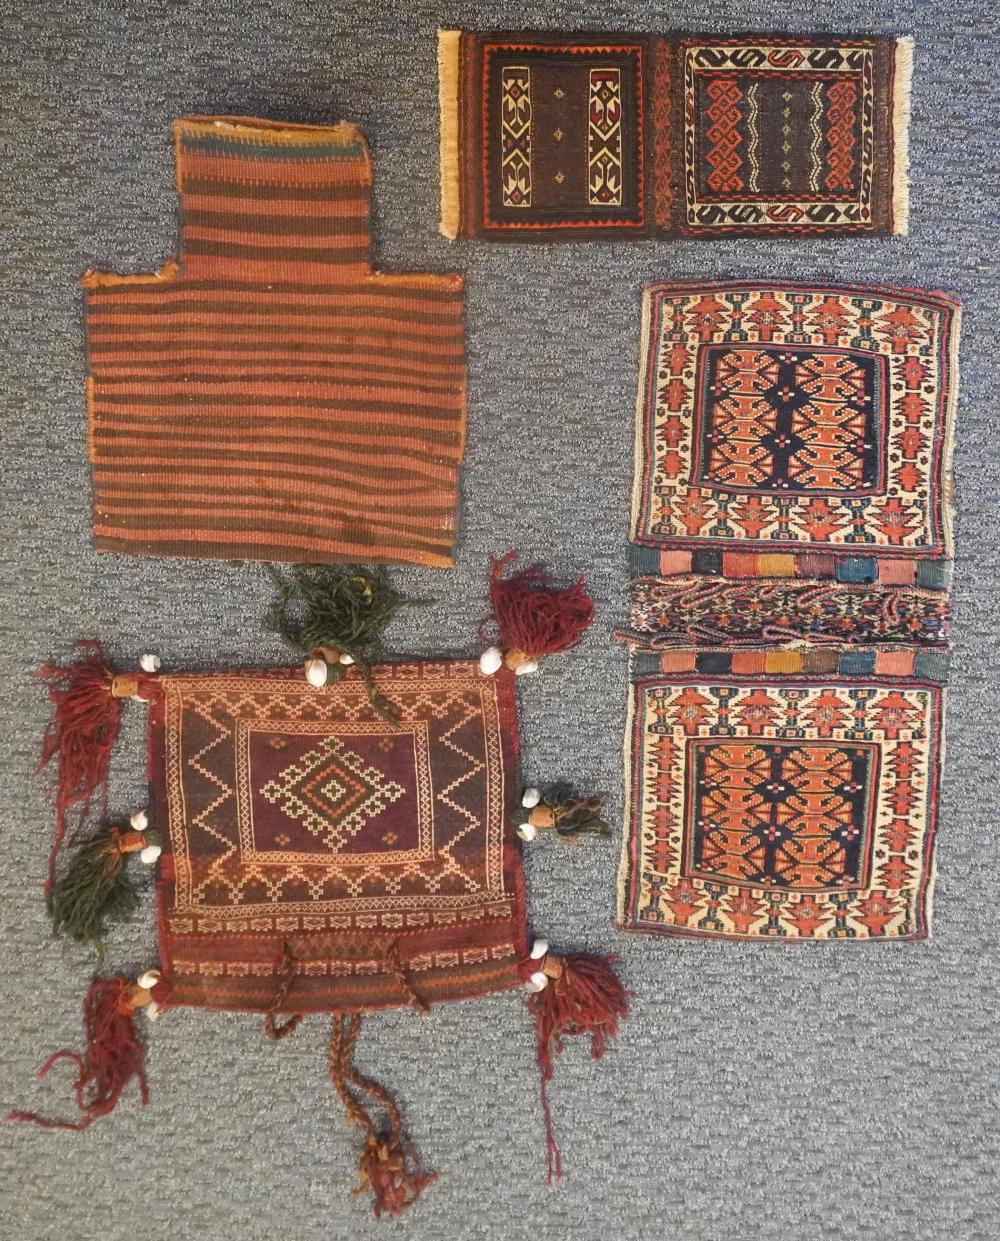 FOUR CENTRAL ASIAN BAGS WALL HANGINGSFour 3c72a2